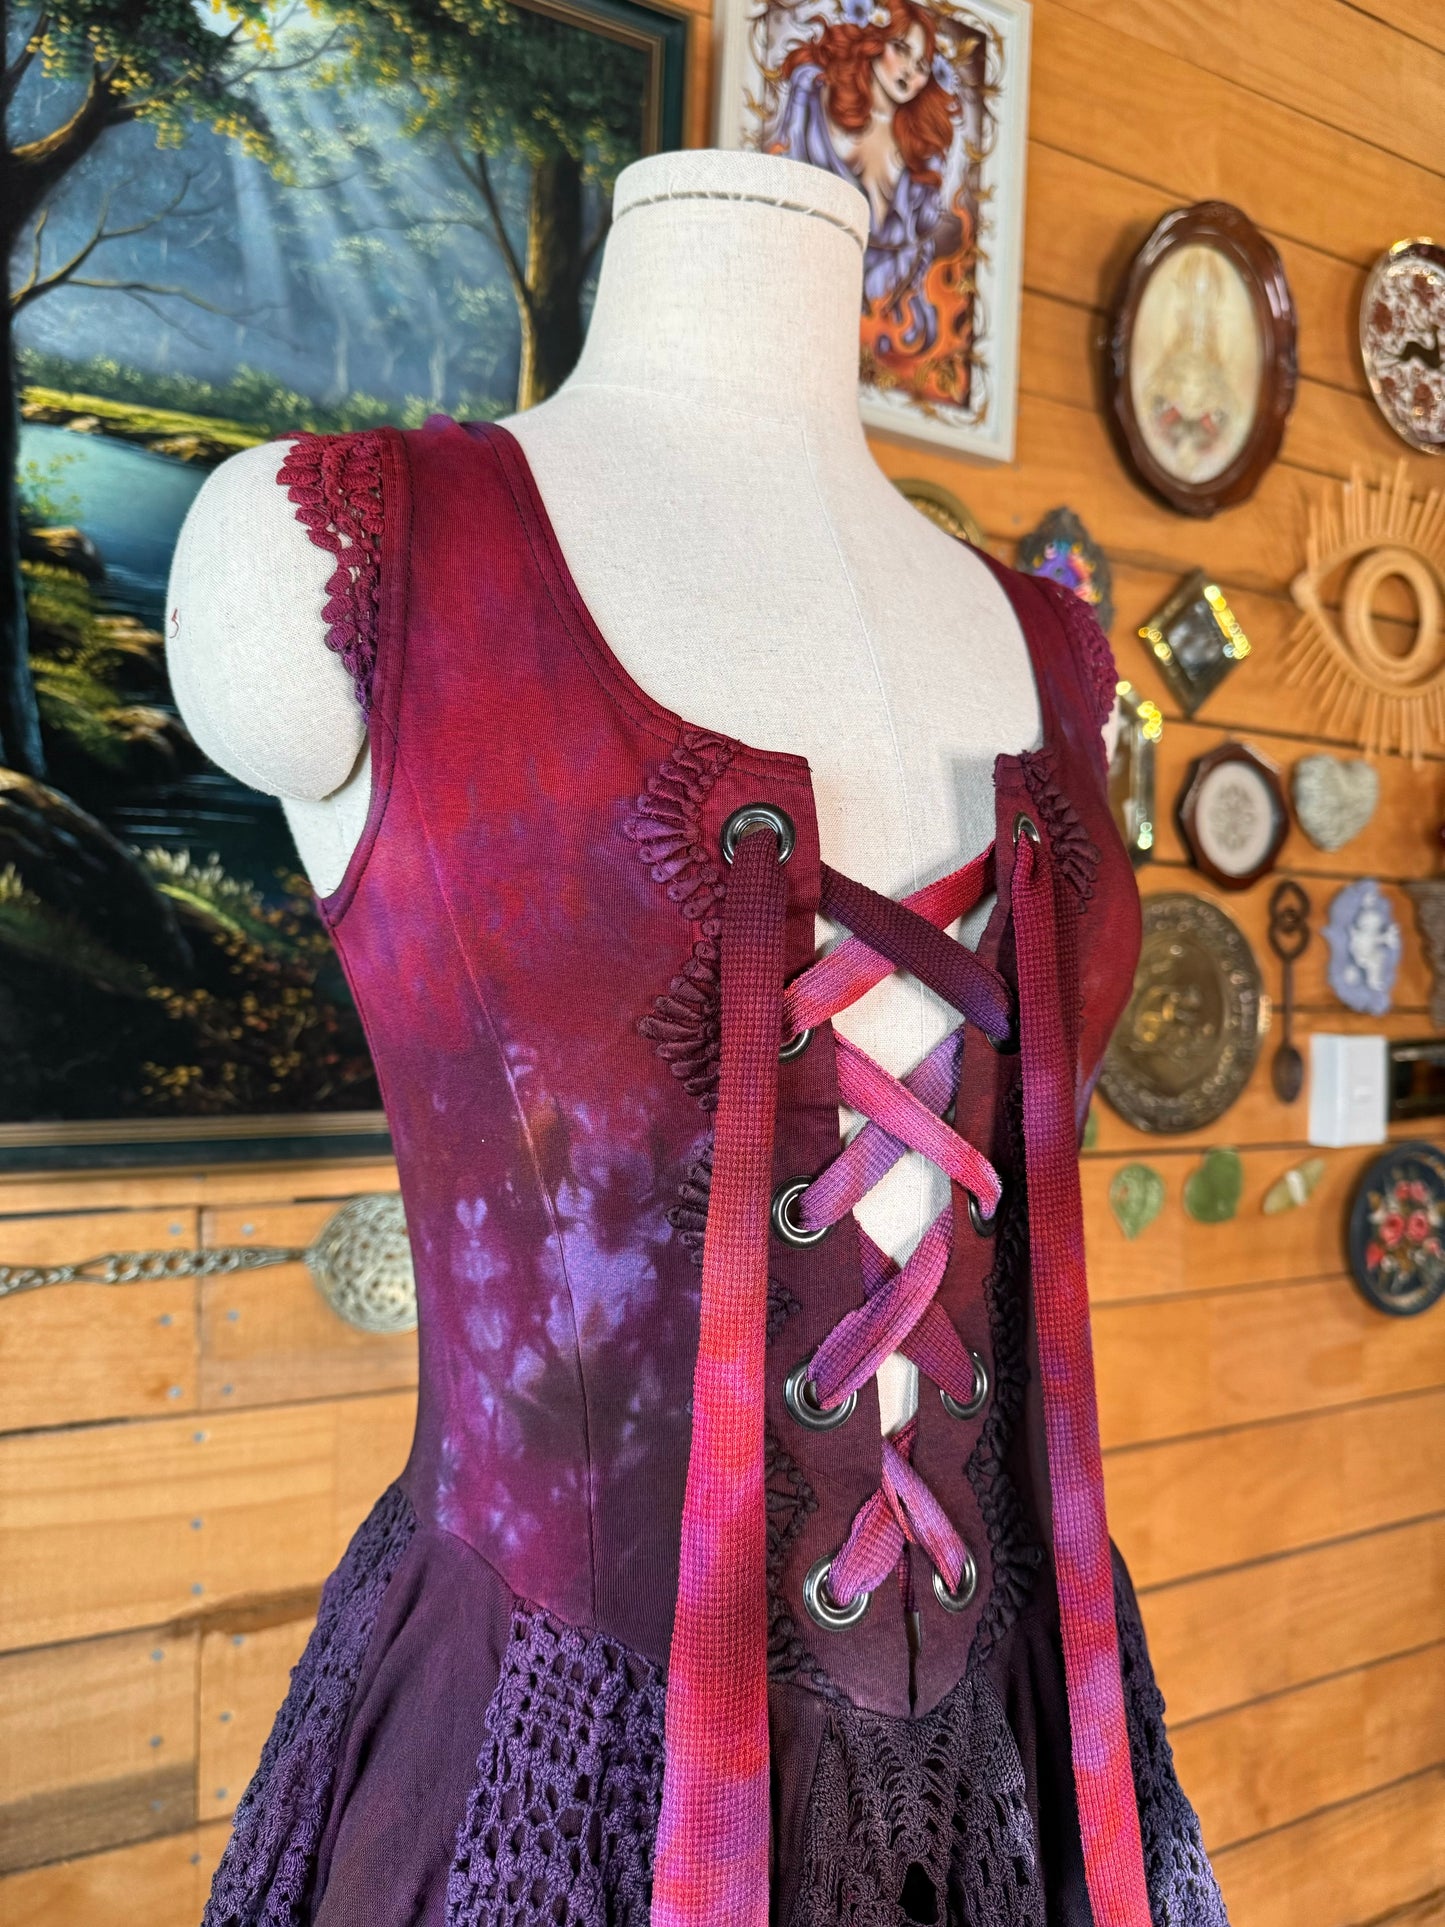 Wildcrafted Fae Dress (S)